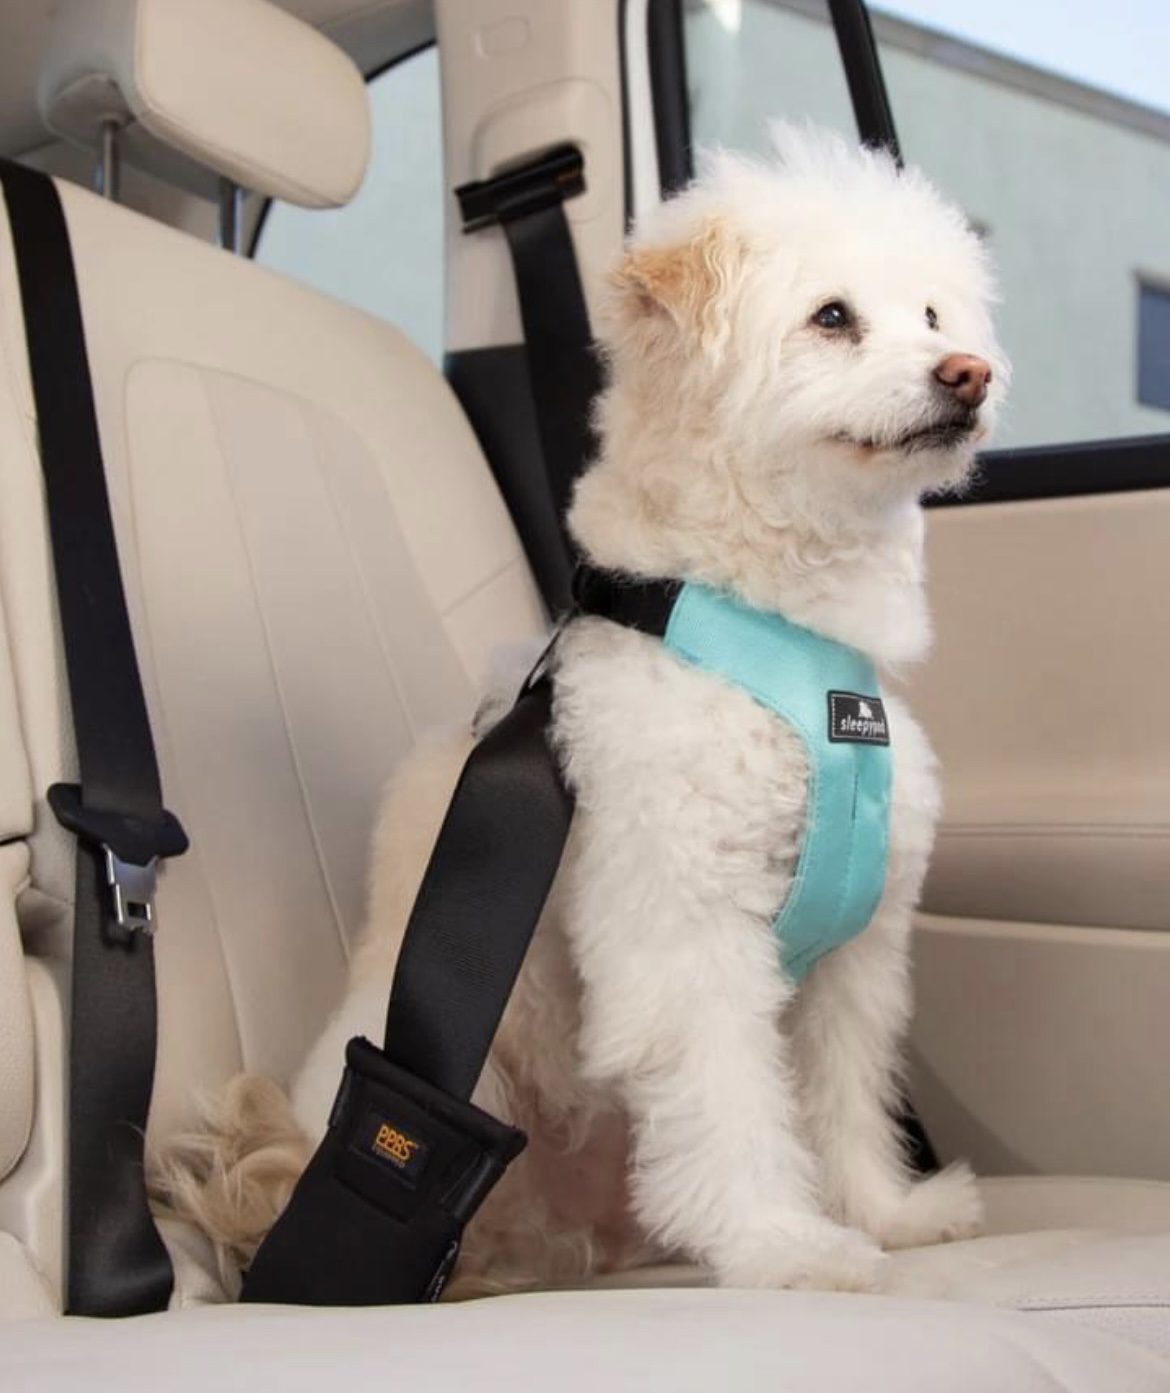 The best crash tested dog harness for your dog